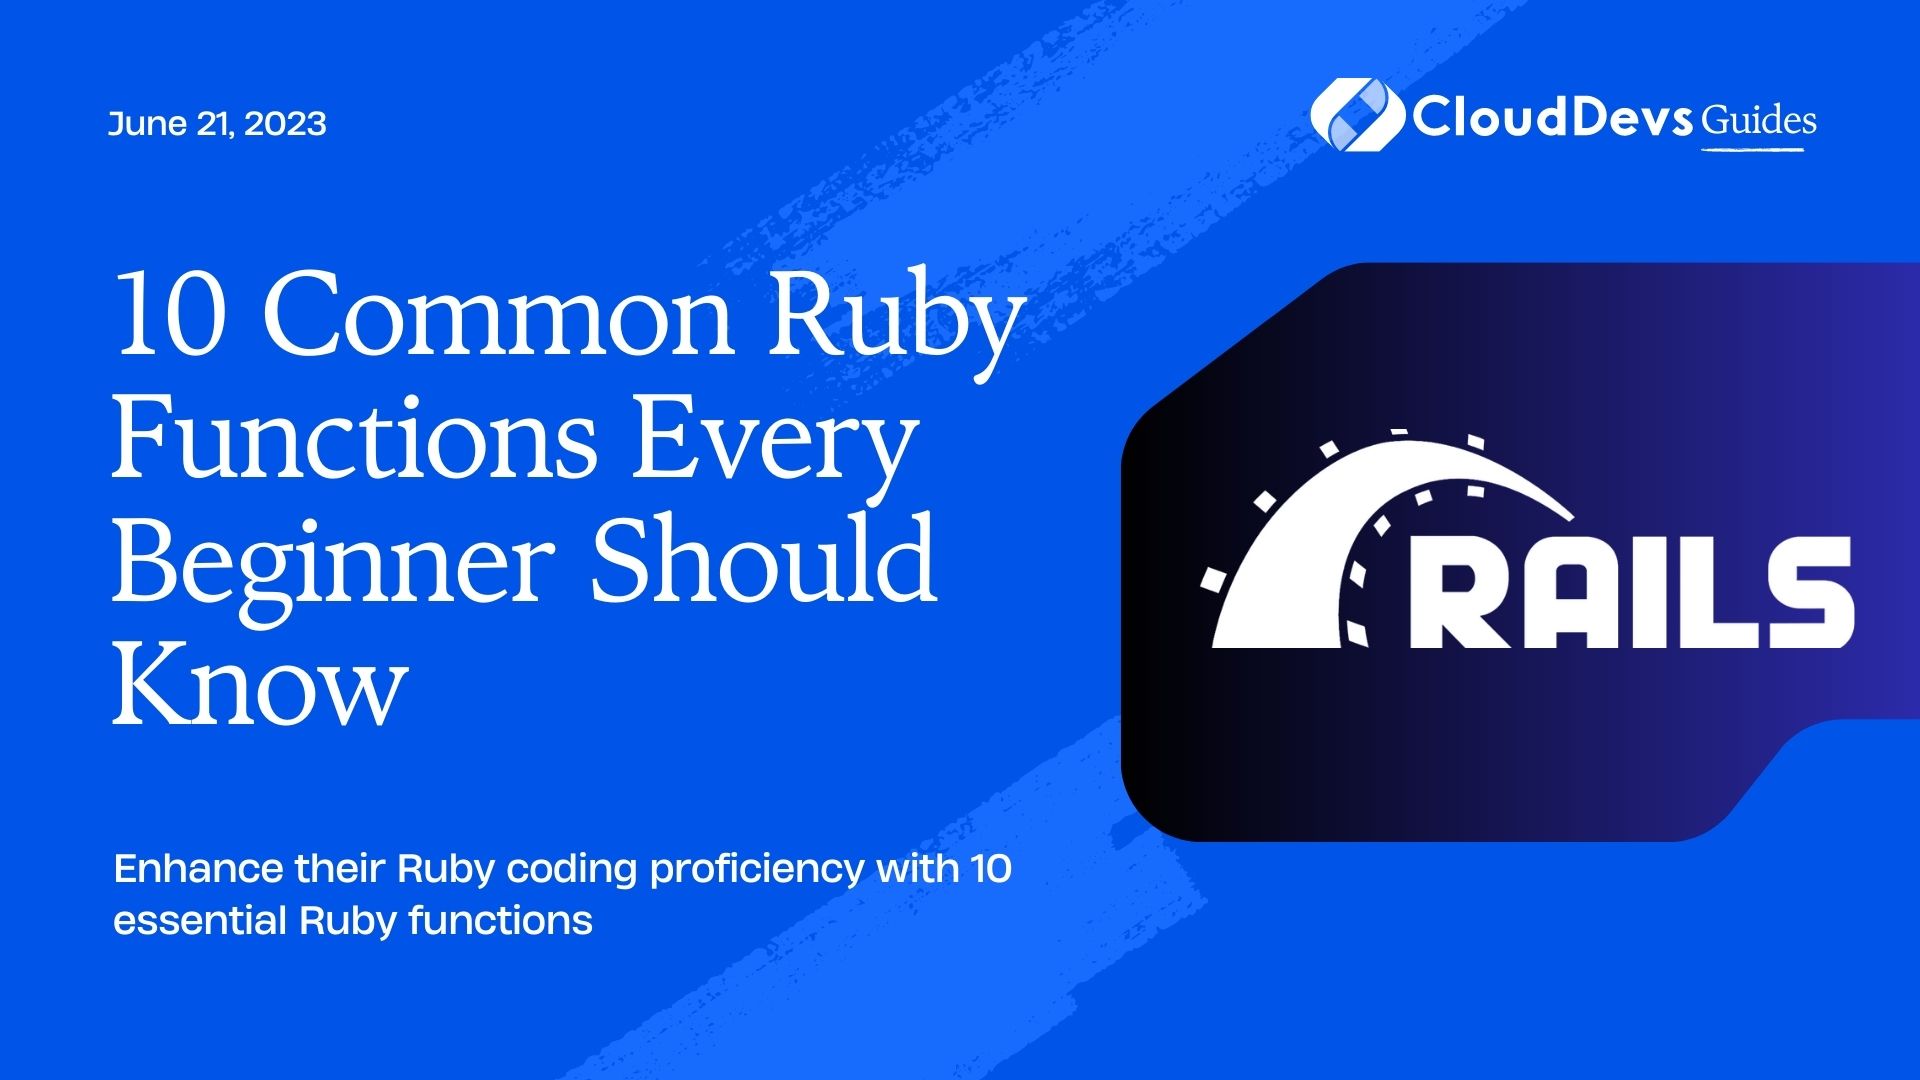 10 Common Ruby Functions Every Beginner Should Know